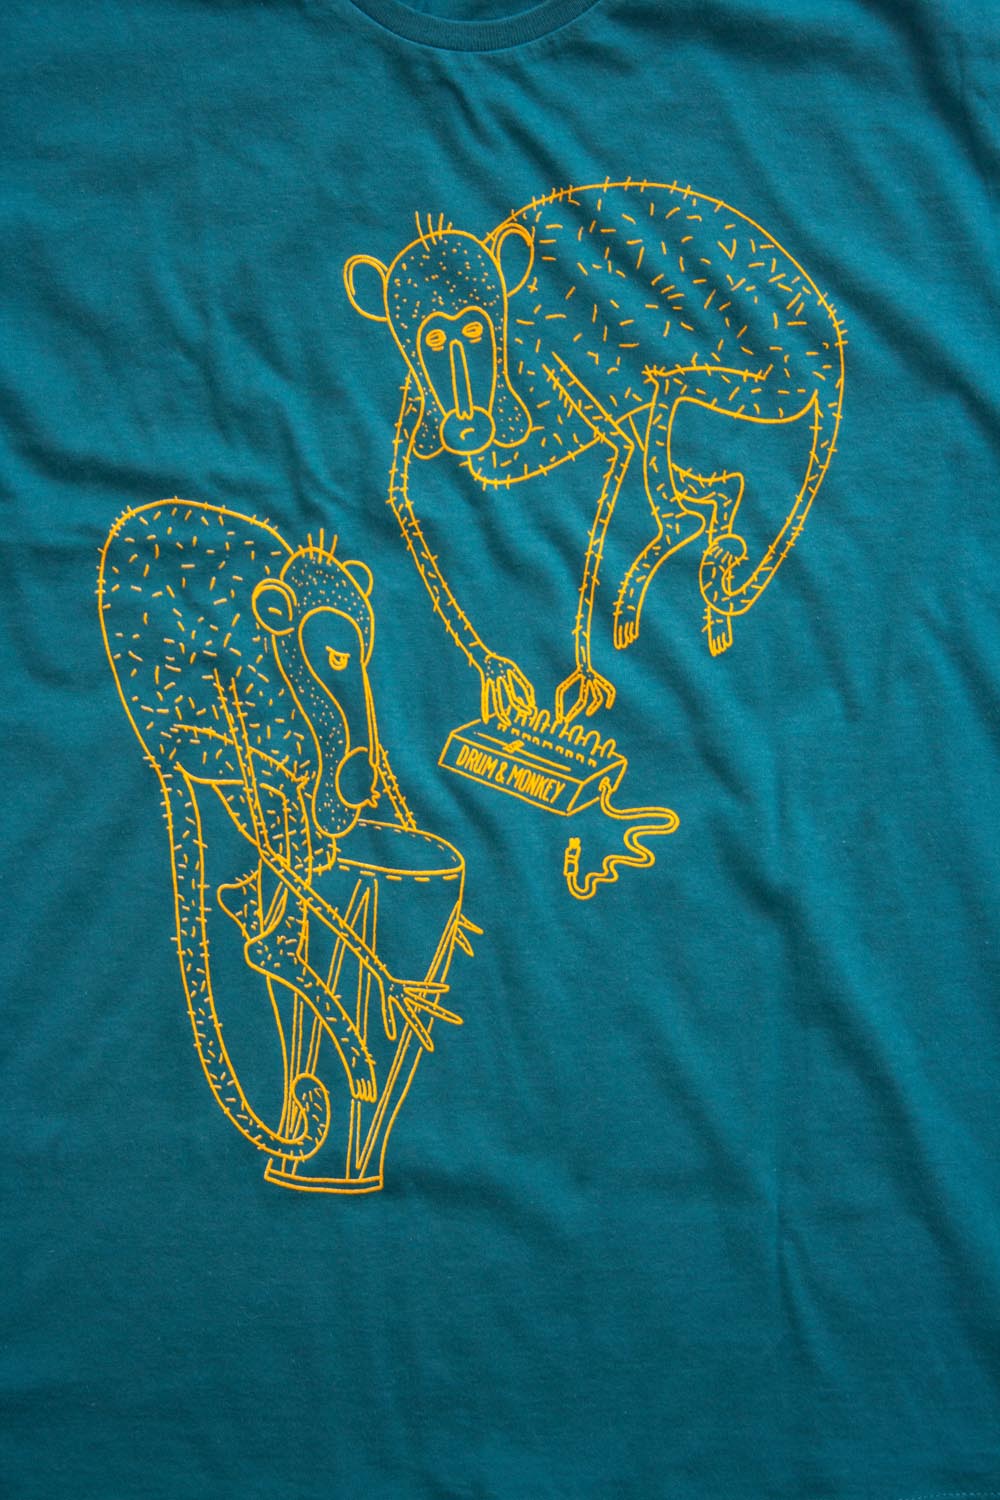 Drum and Monkey Apes T-Shirt 